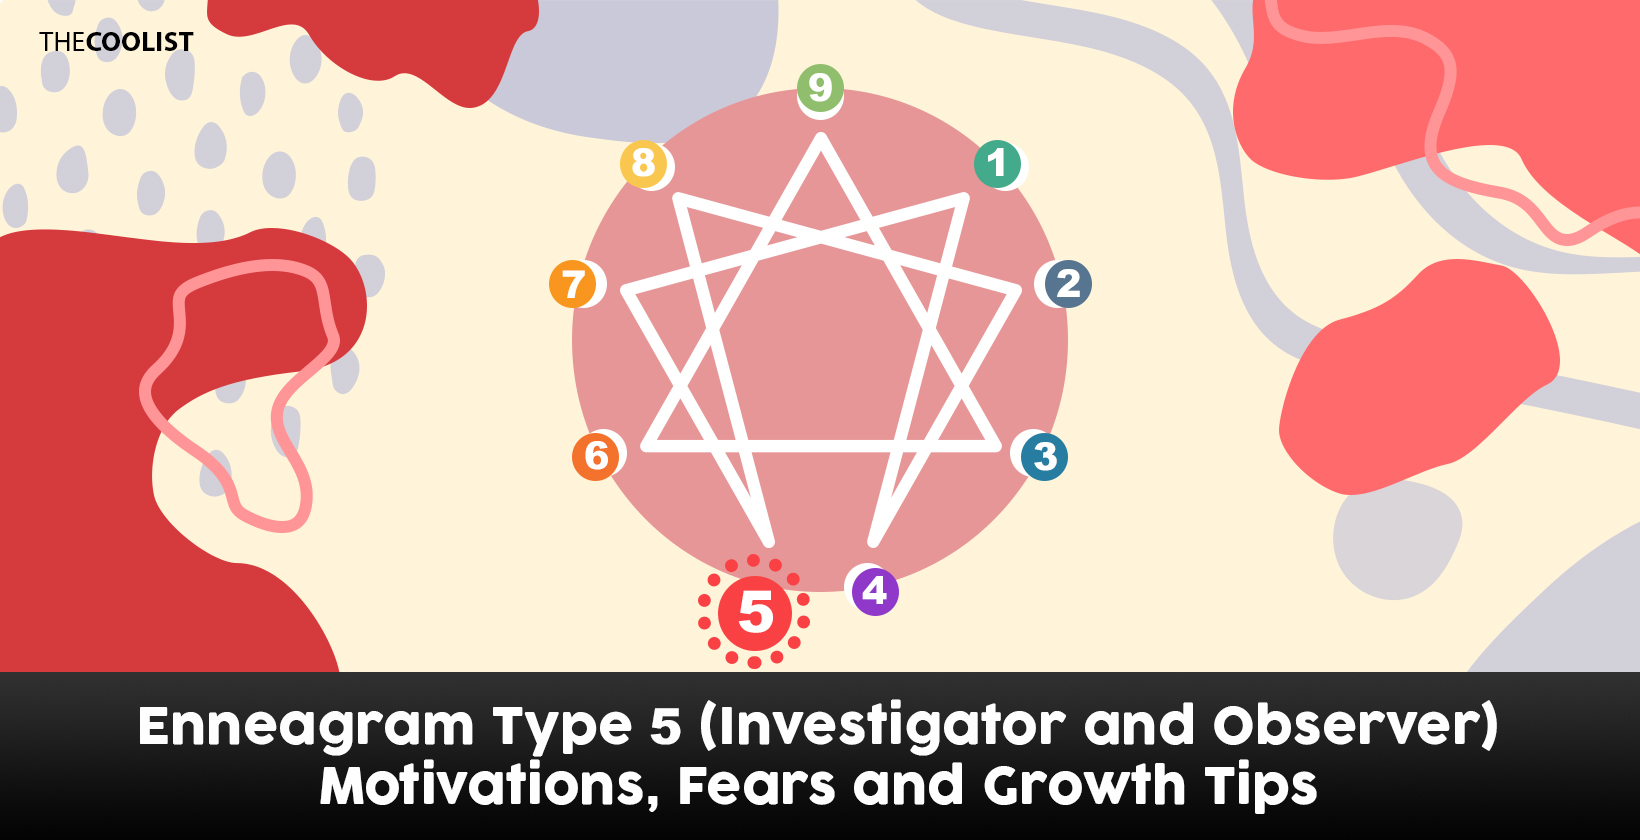 Enneagram Type 5 (Investigator and Observer) Motivations, Fears and Levels of Development